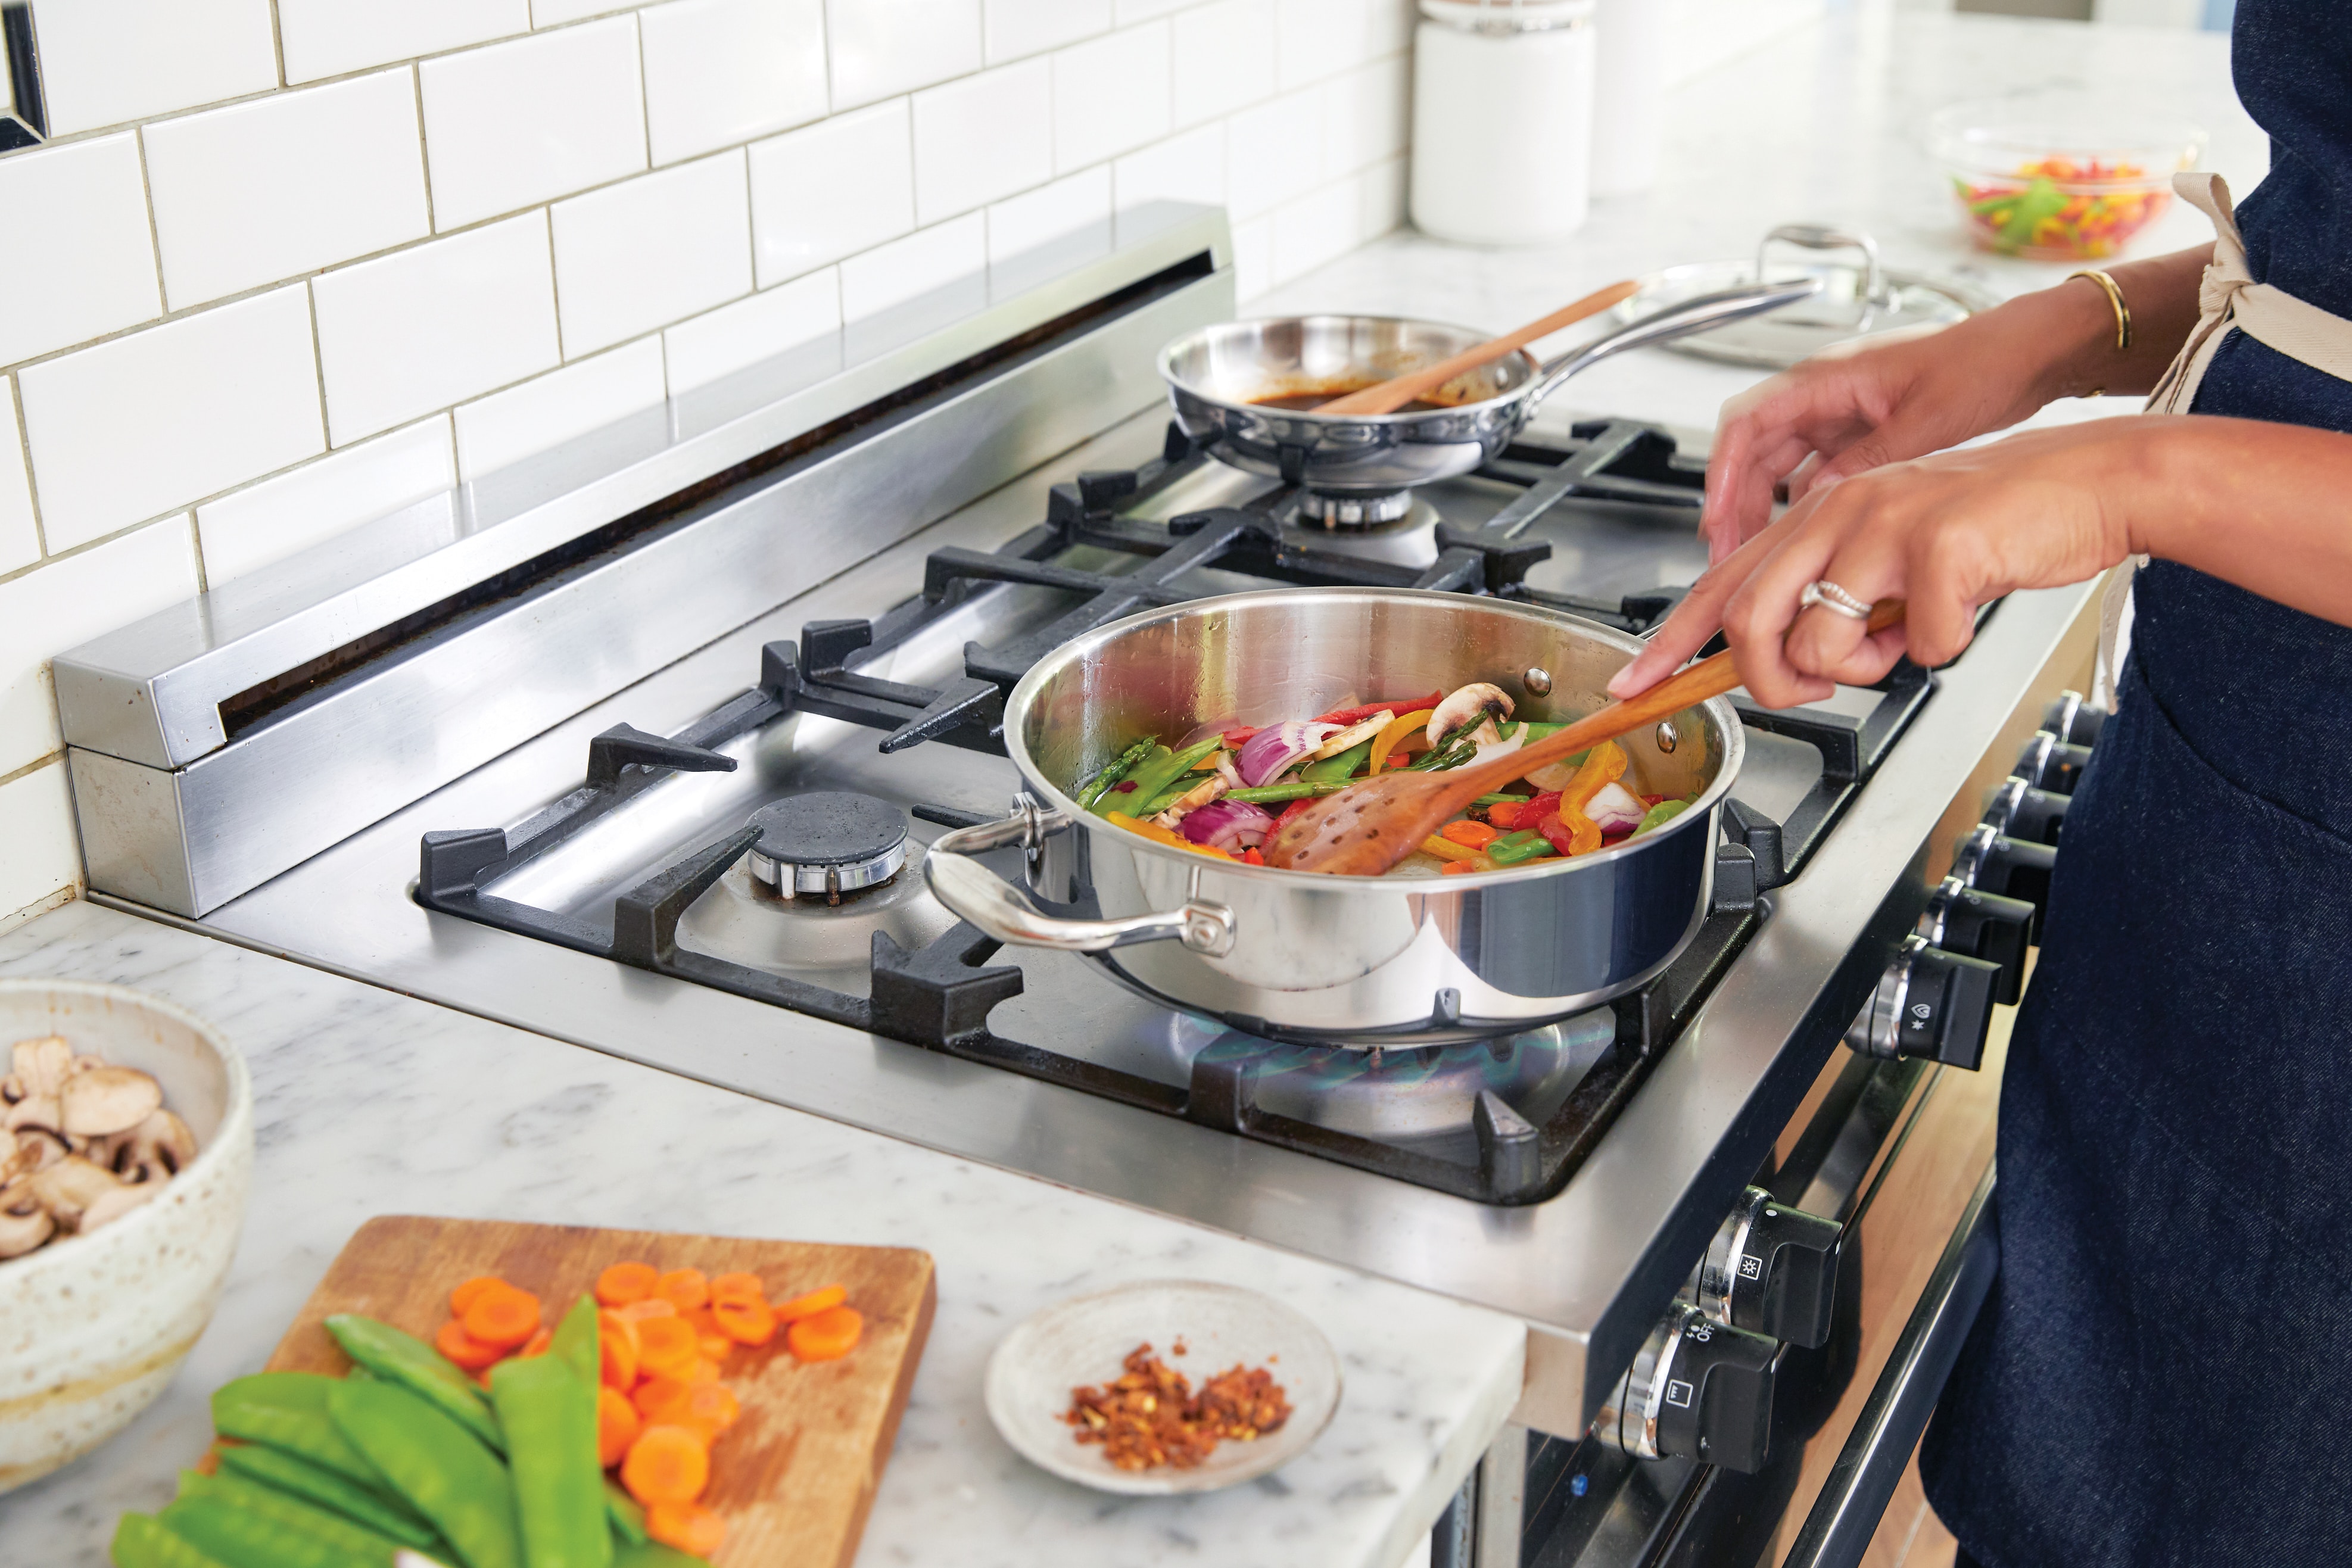 5 Essential Rules of Cooking - Eat Smart, Move More, Weigh Less